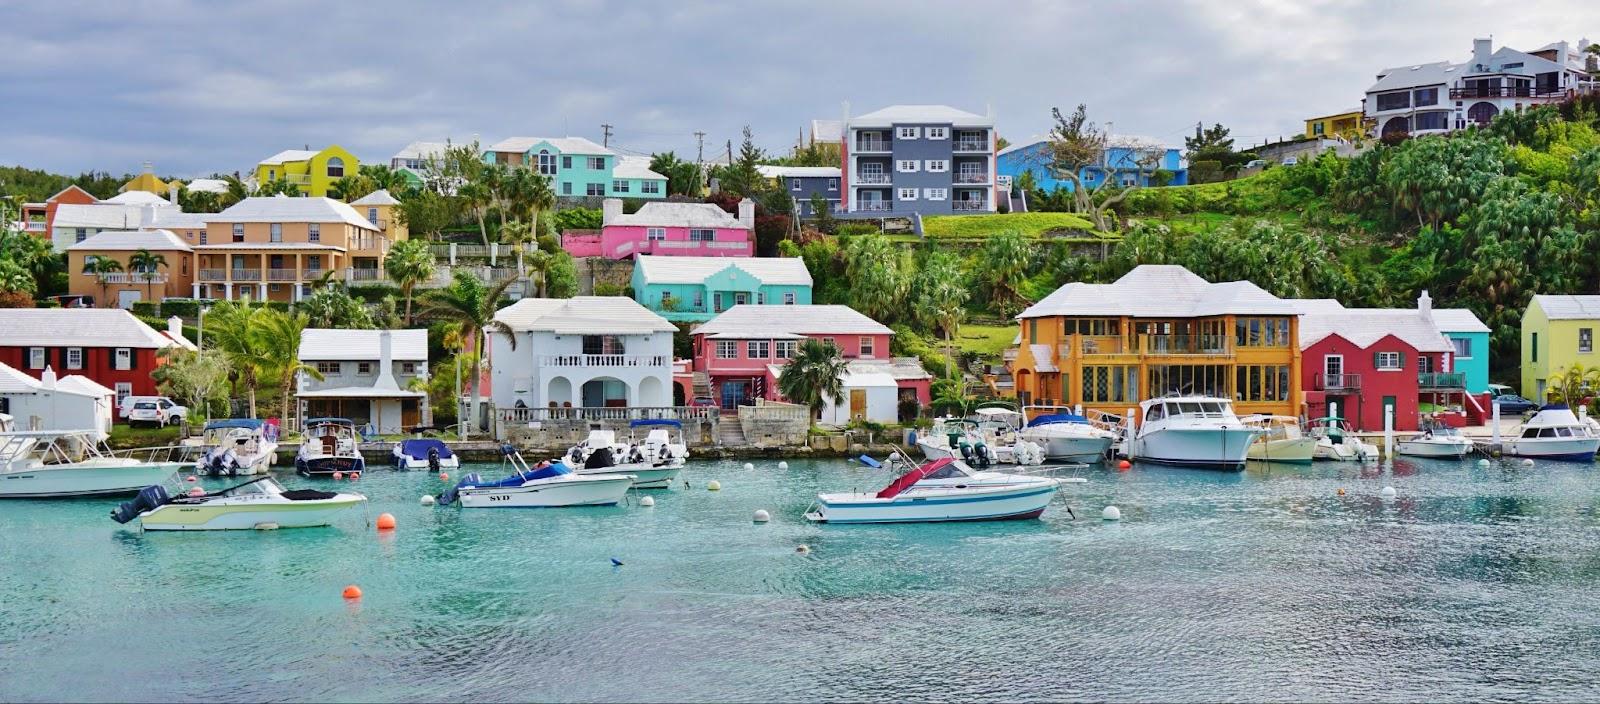 The colorful village of Flatts, in the British Overseas Territory of Bermuda, is built around the Harrington Sound lagoon and the Flatts inlet